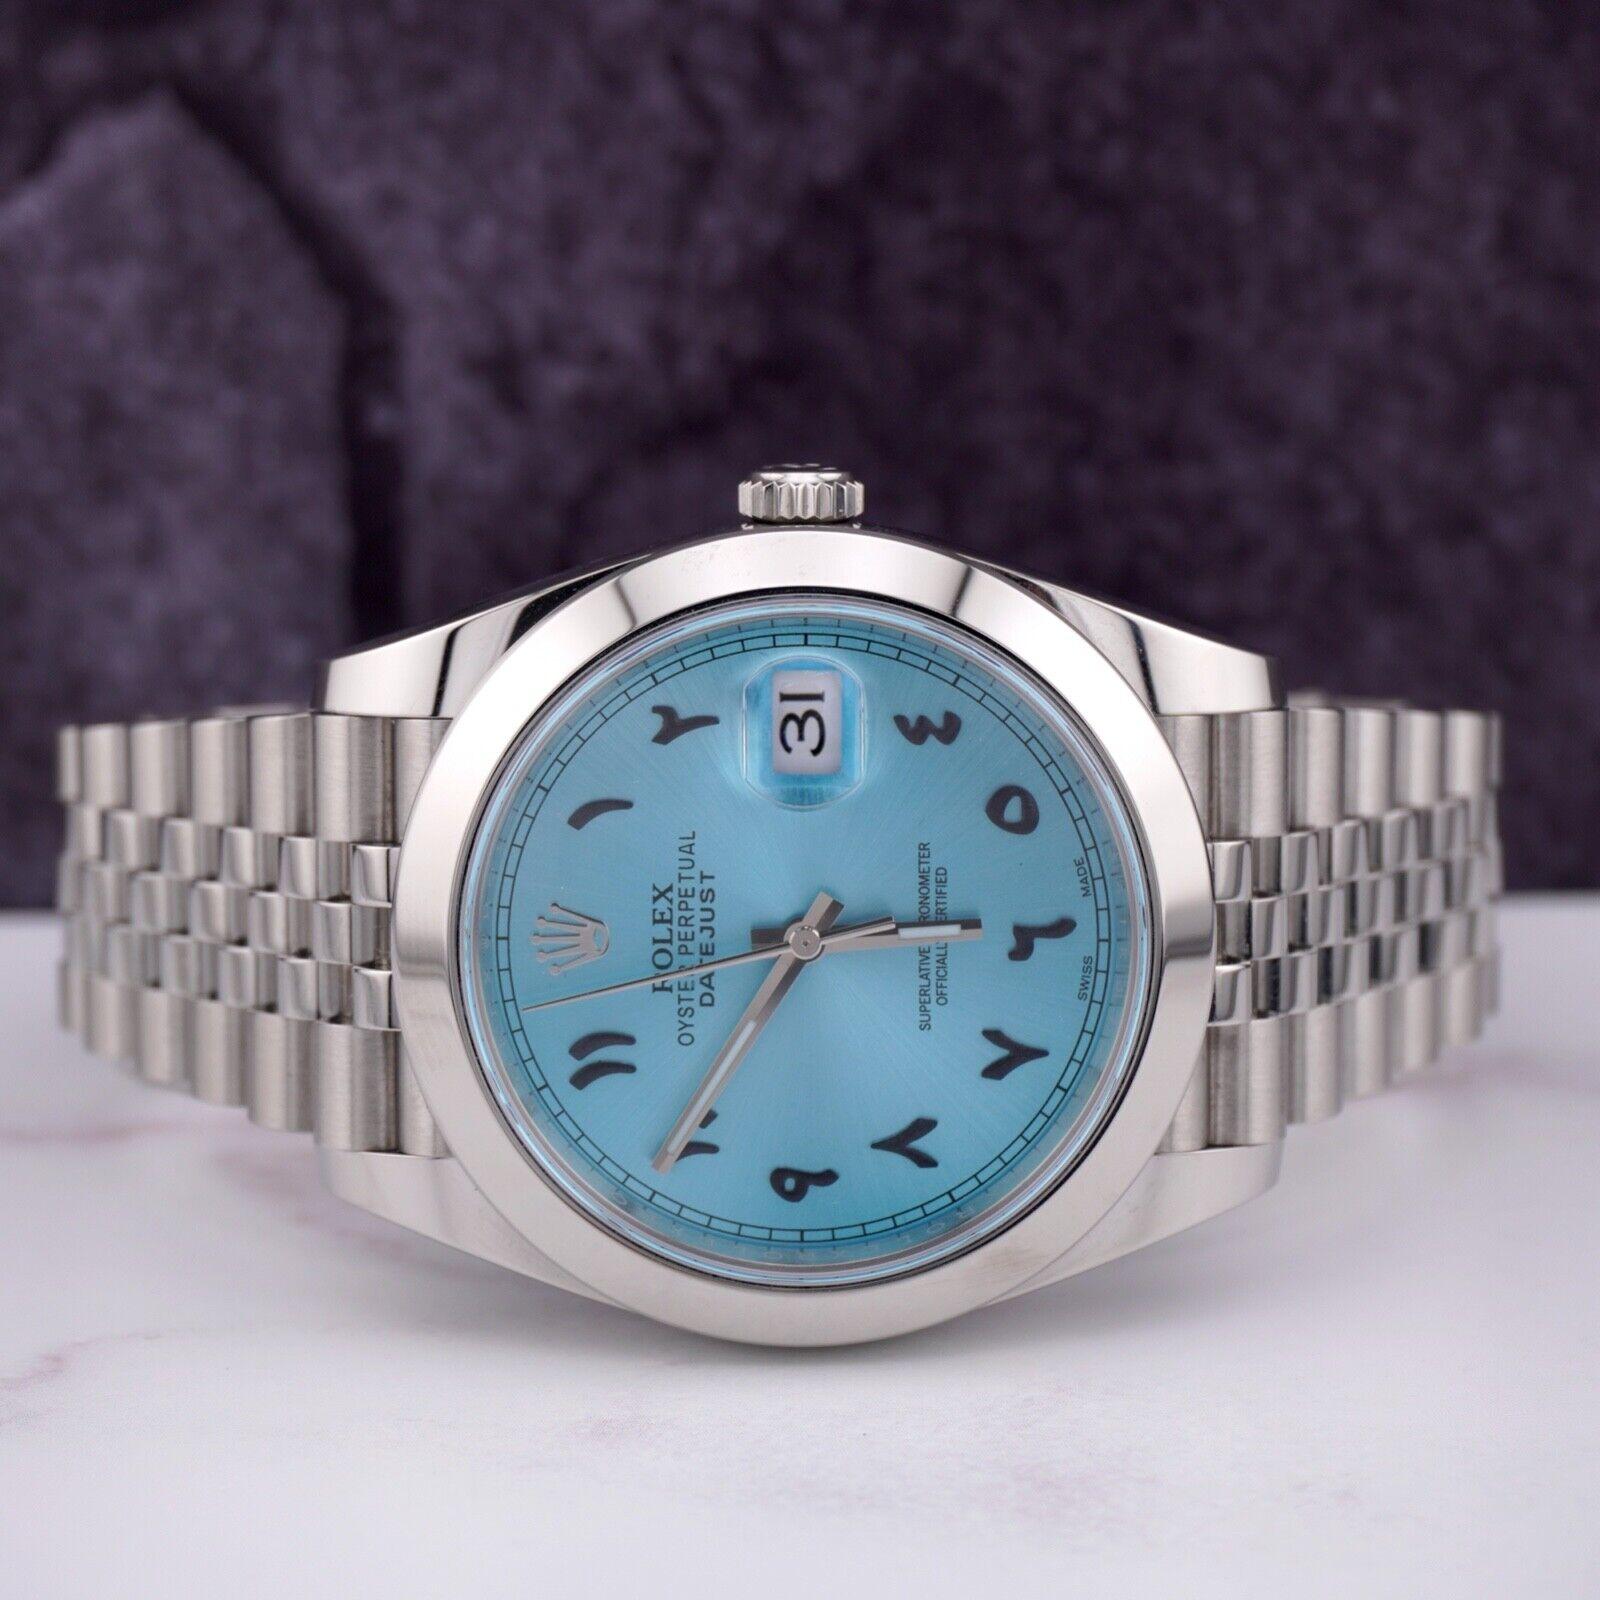 Rolex Datejust 41mm Watch. A Pre-owned watch w/ Original Rolex Box and 2020 Card. Watch is 100% Authentic and Comes with Authenticity Card. Watch Reference is 126300 and is in Excellent Condition, it looks almost New (See Pictures). It has a Custom